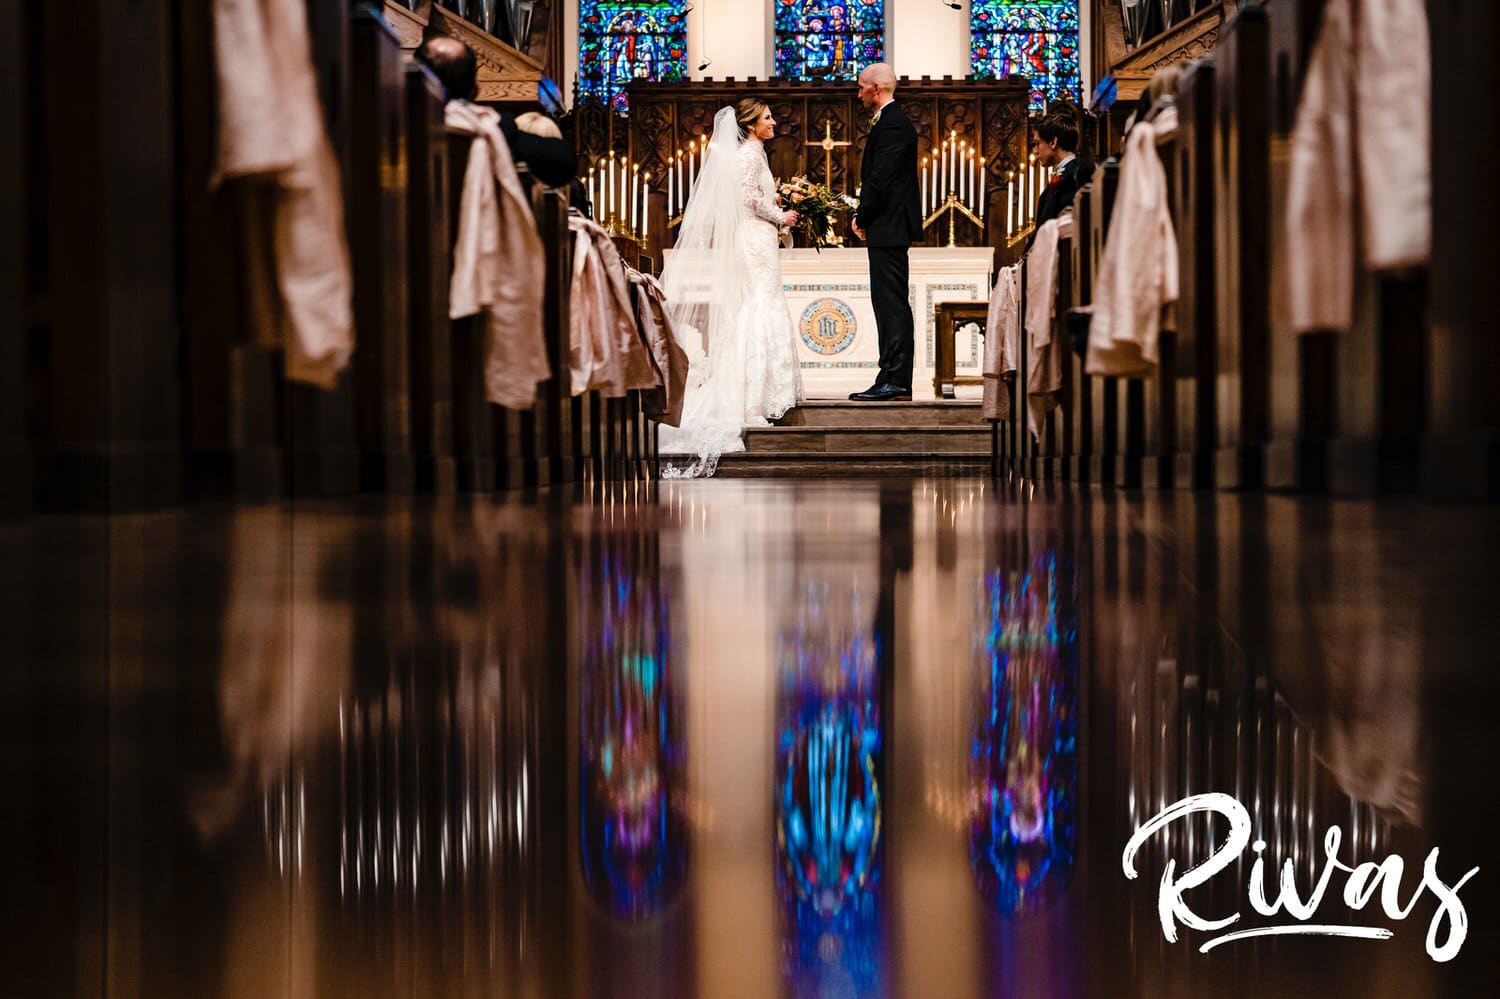 A colorful, wide picture taken from the ground looking up of a bride and groom holding hands at the front of the church with the church's stained glass windows reflected in the shiny floor. 